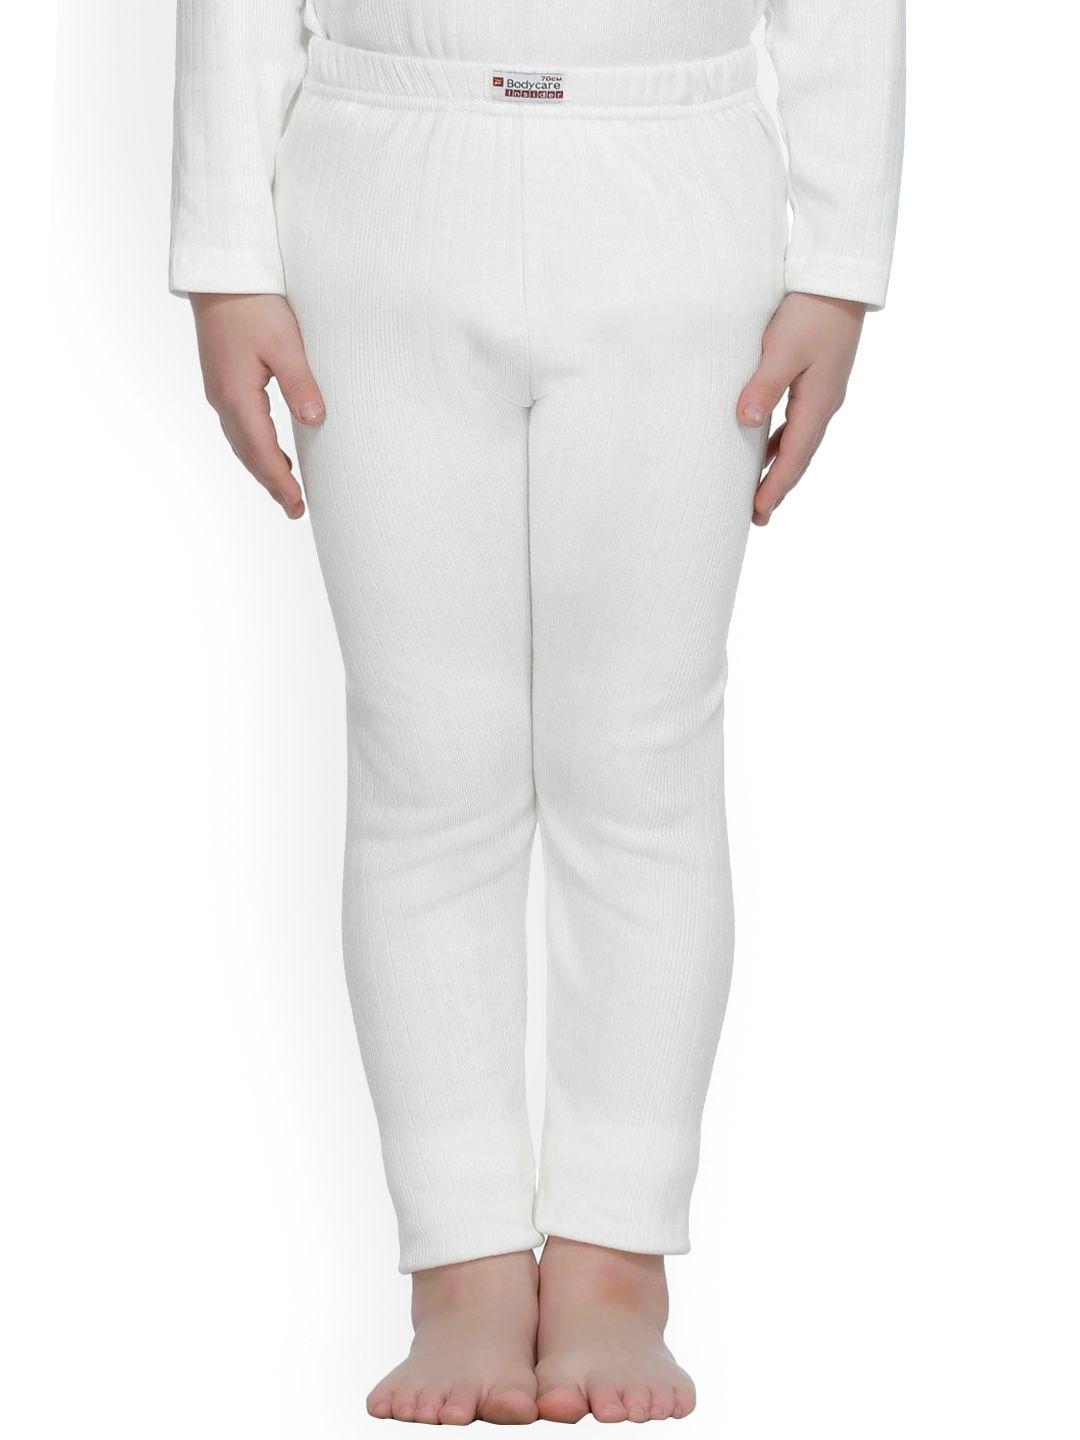 bodycare-kids-boys-white-solid-cotton-thermal-bottoms